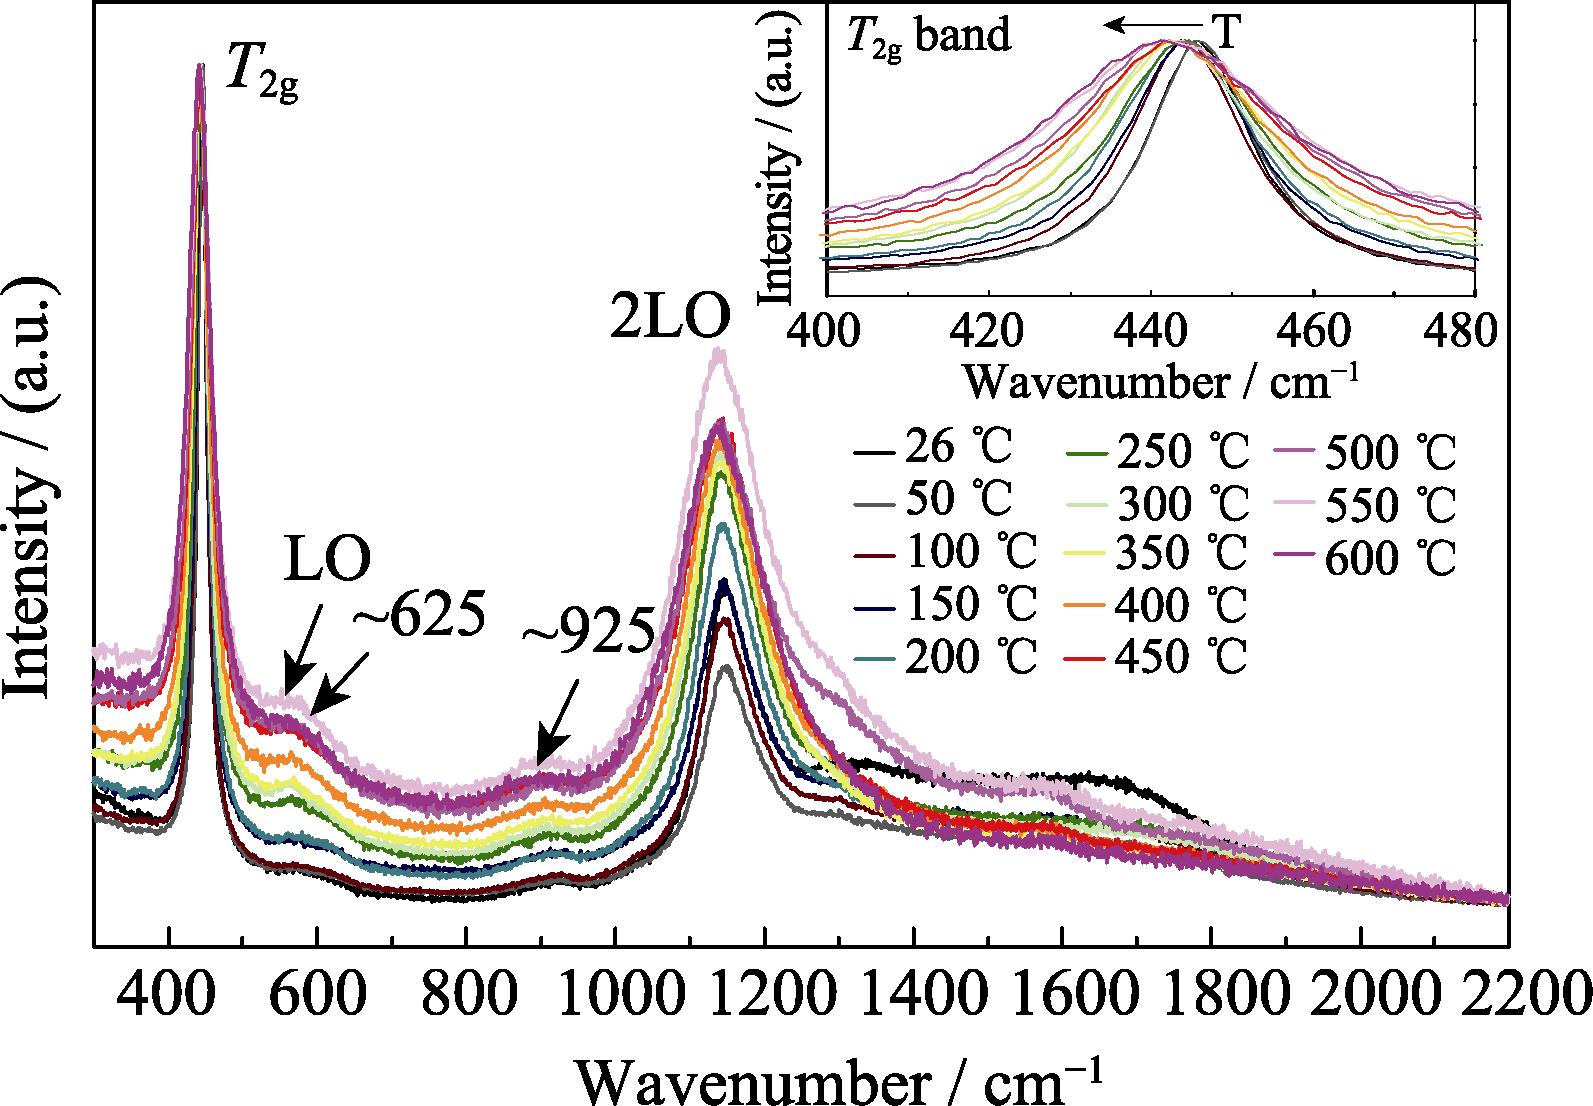 Roman spectra of UO2 at different temperatures with inset showing their enlarged parts with the wavenumber from 400 to 480 cm-1[55]